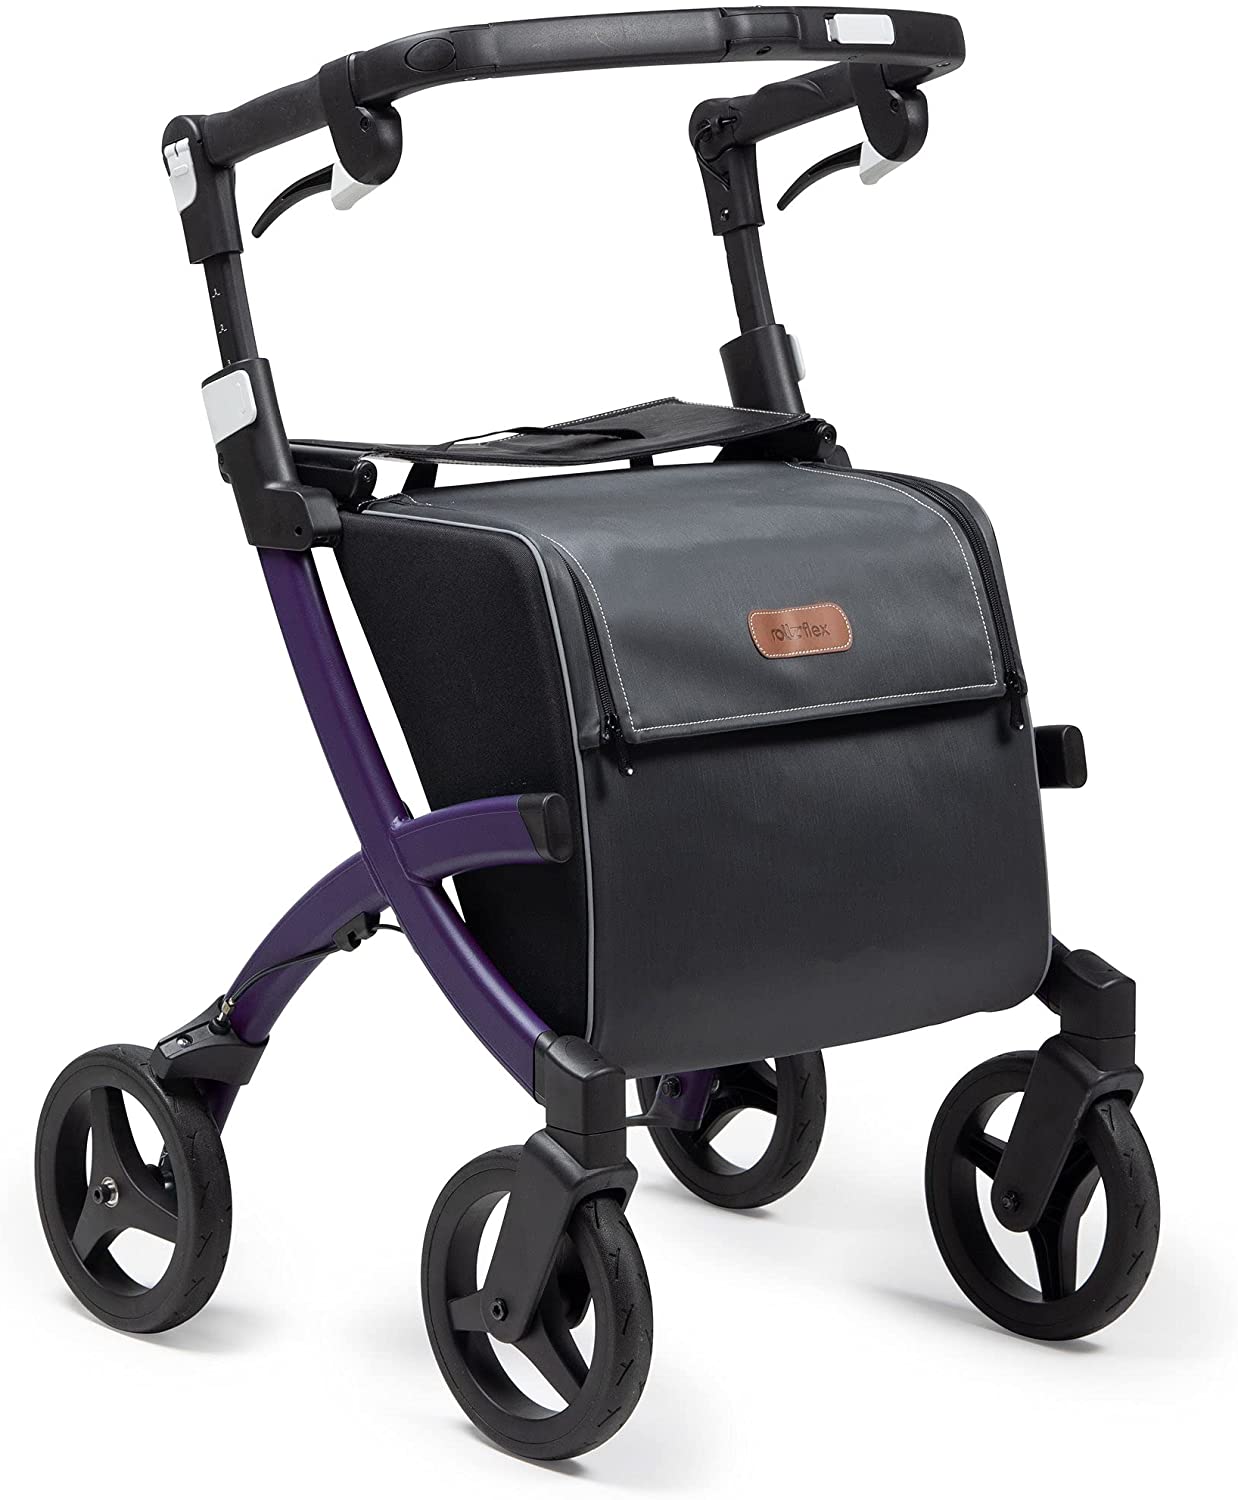 Rollz Flex 2 - Improved Rollator with Water Resistant Bag (Standard Size, B